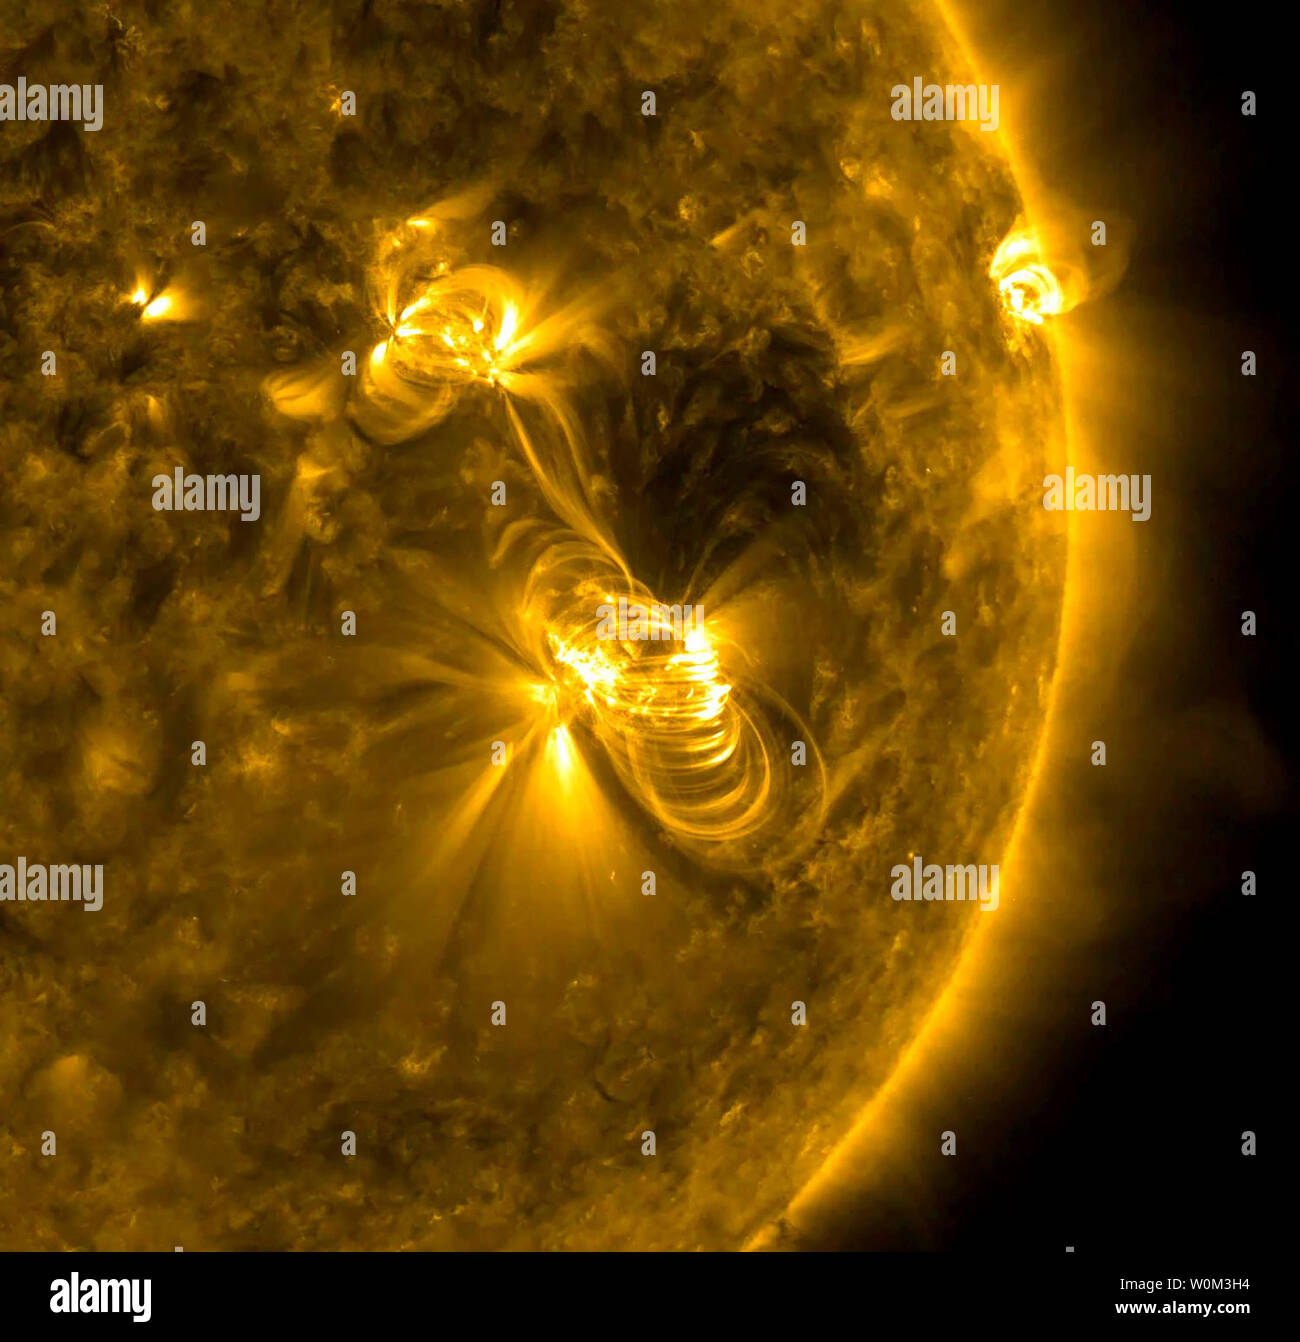 A medium-sized (M2) solar flare and a coronal mass ejection (CME) erupted from the same, large active region of the sun on July 14, 2017. The flare lasted almost two hours, quite a long duration. The coils arcing over this active region are particles spiraling along magnetic field lines, which were reorganizing themselves after the magnetic field was disrupted by the blast. Solar flares are giant explosions on the sun that send energy, light and high-speed particles into space. These flares are often associated with solar magnetic storms known as coronal mass ejections (CMEs). While these are Stock Photo